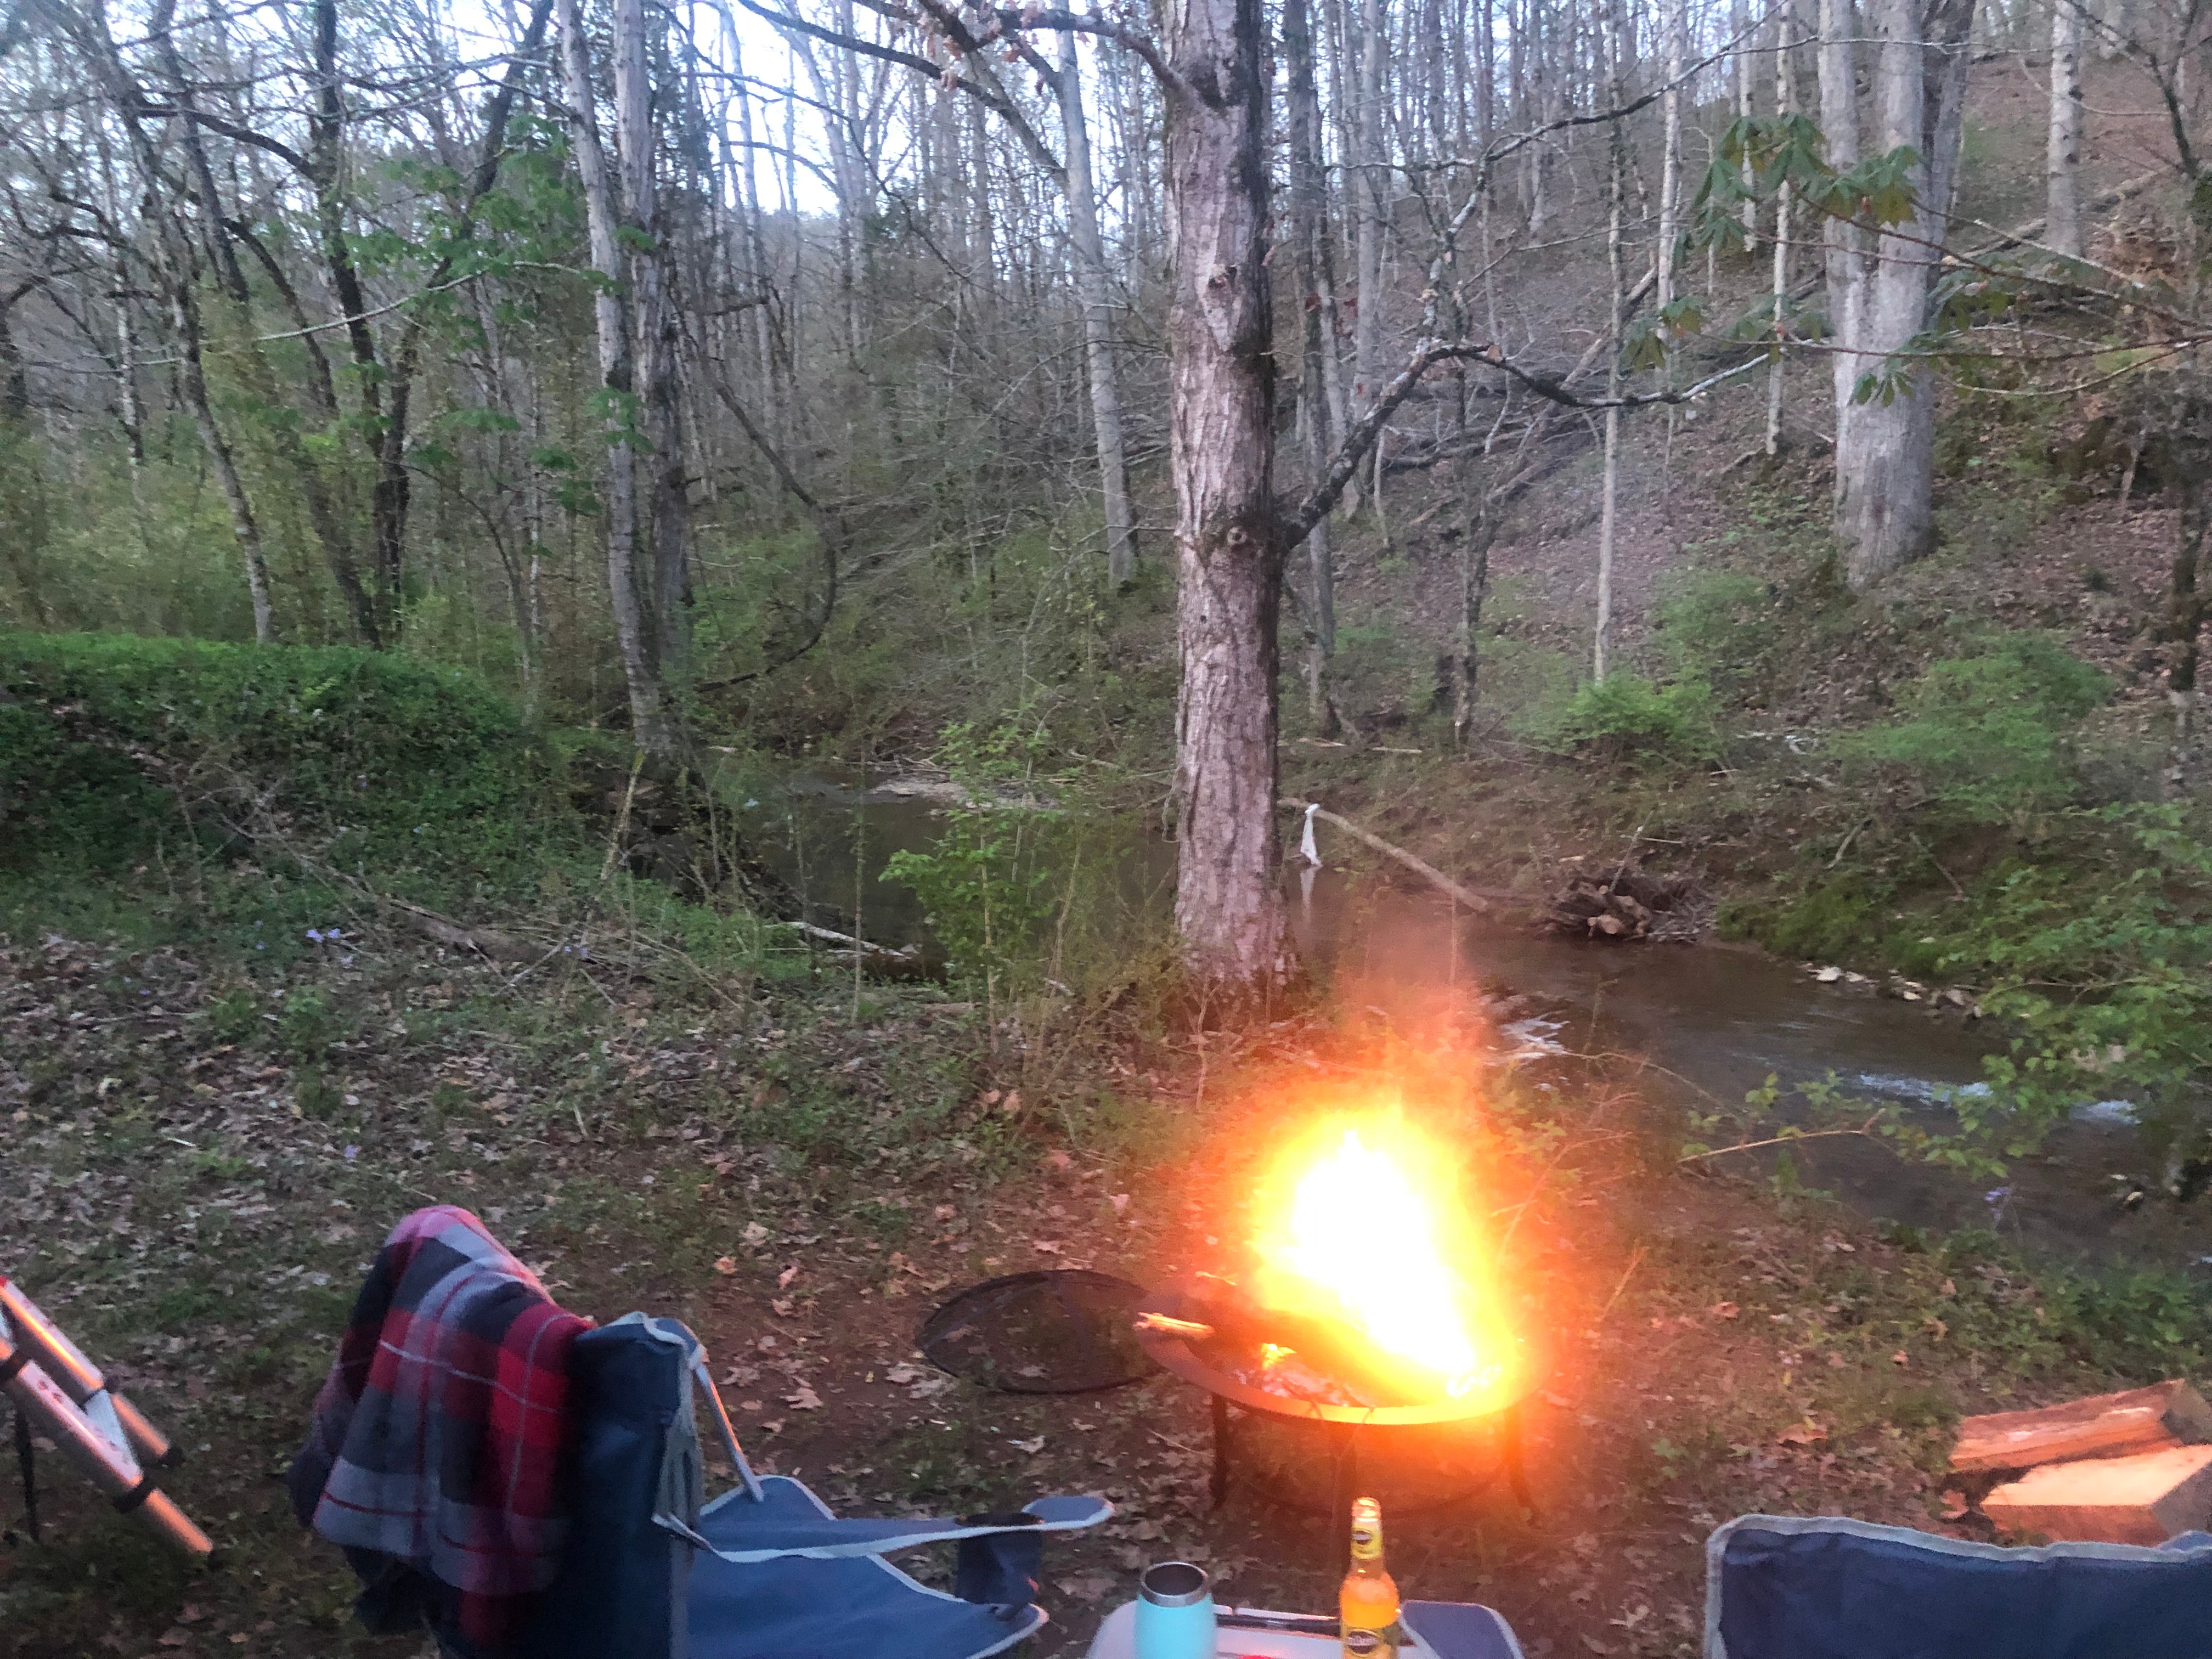 Nothing better than campfire by the creek